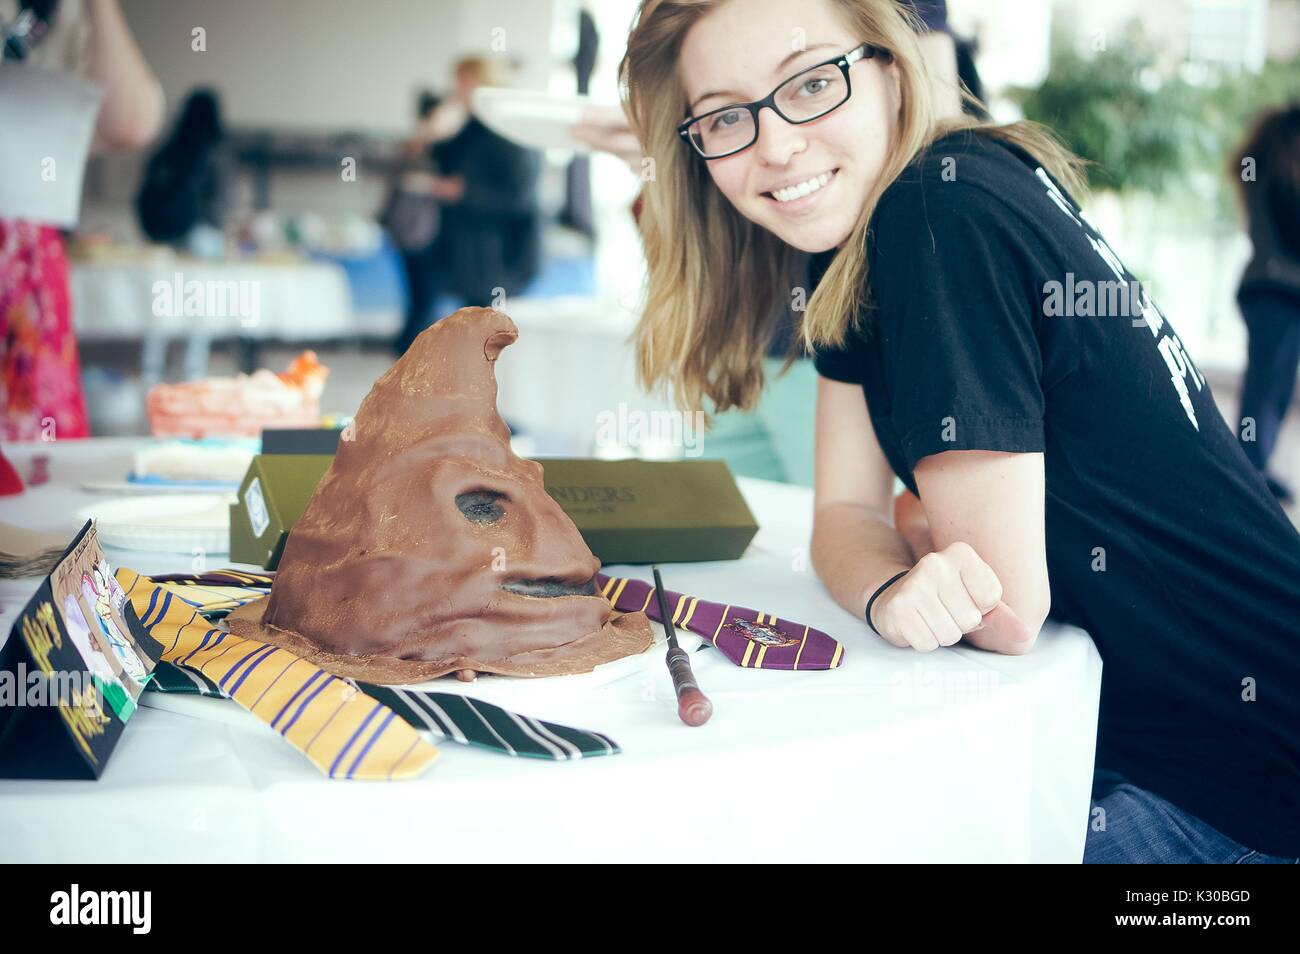 An undergraduate college student stands with her Harry Potter cake during Johns Hopkins University's annual 'Read It And Eat It' Edible Book Festival on the Homewood campus in Baltimore, Maryland, March, 2016. Courtesy Eric Chen. Stock Photo